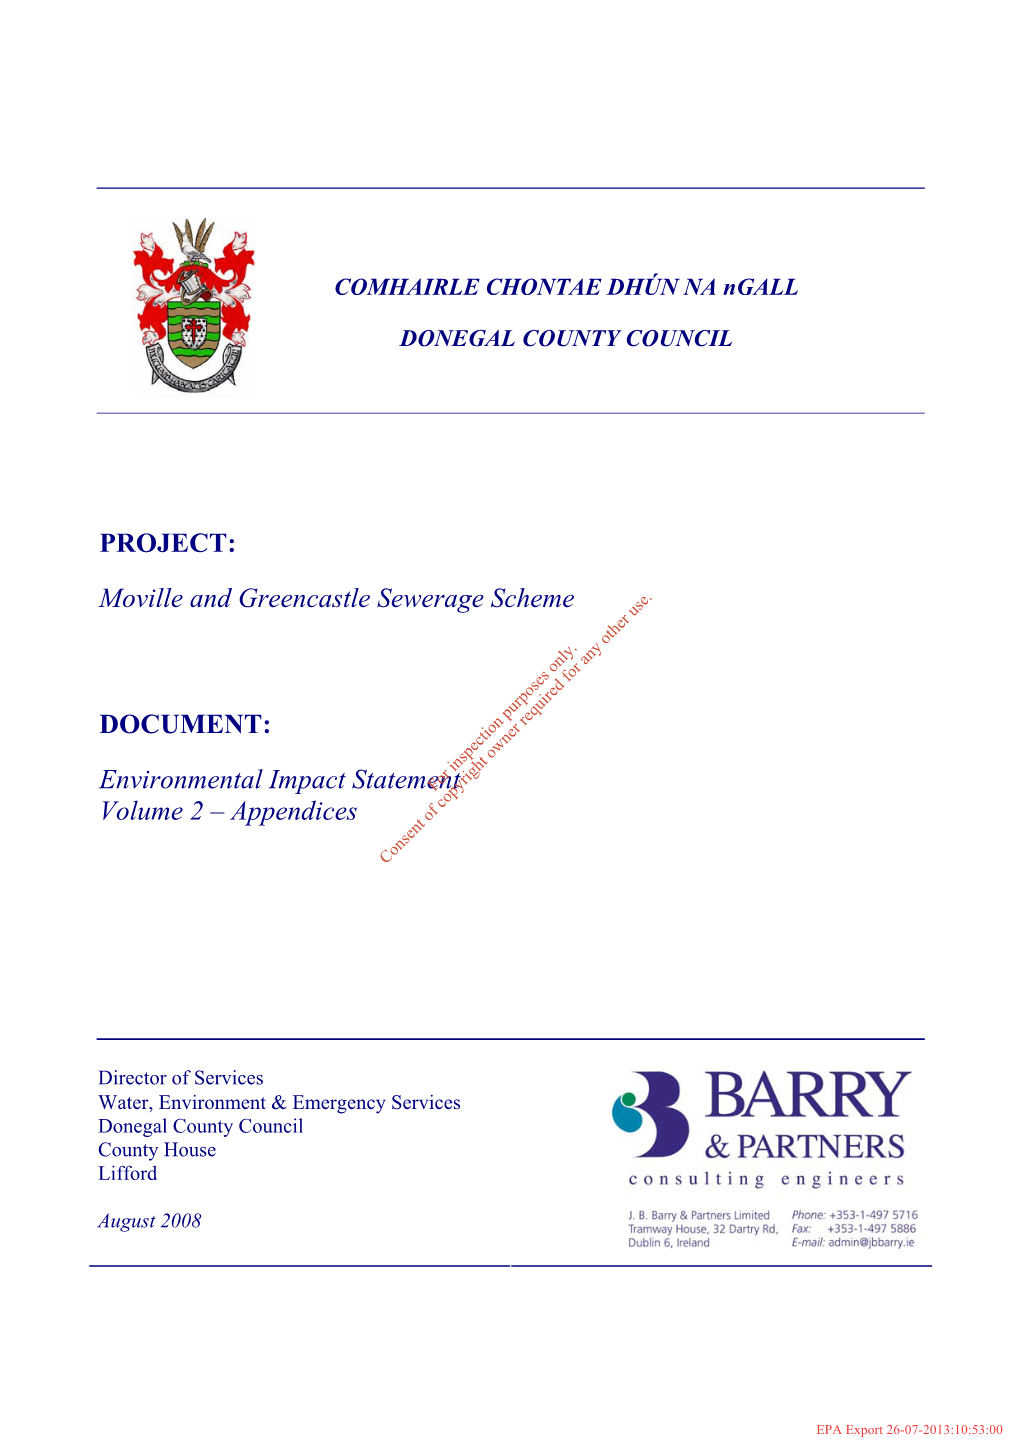 Moville and Greencastle Sewerage Scheme DOCUMENT